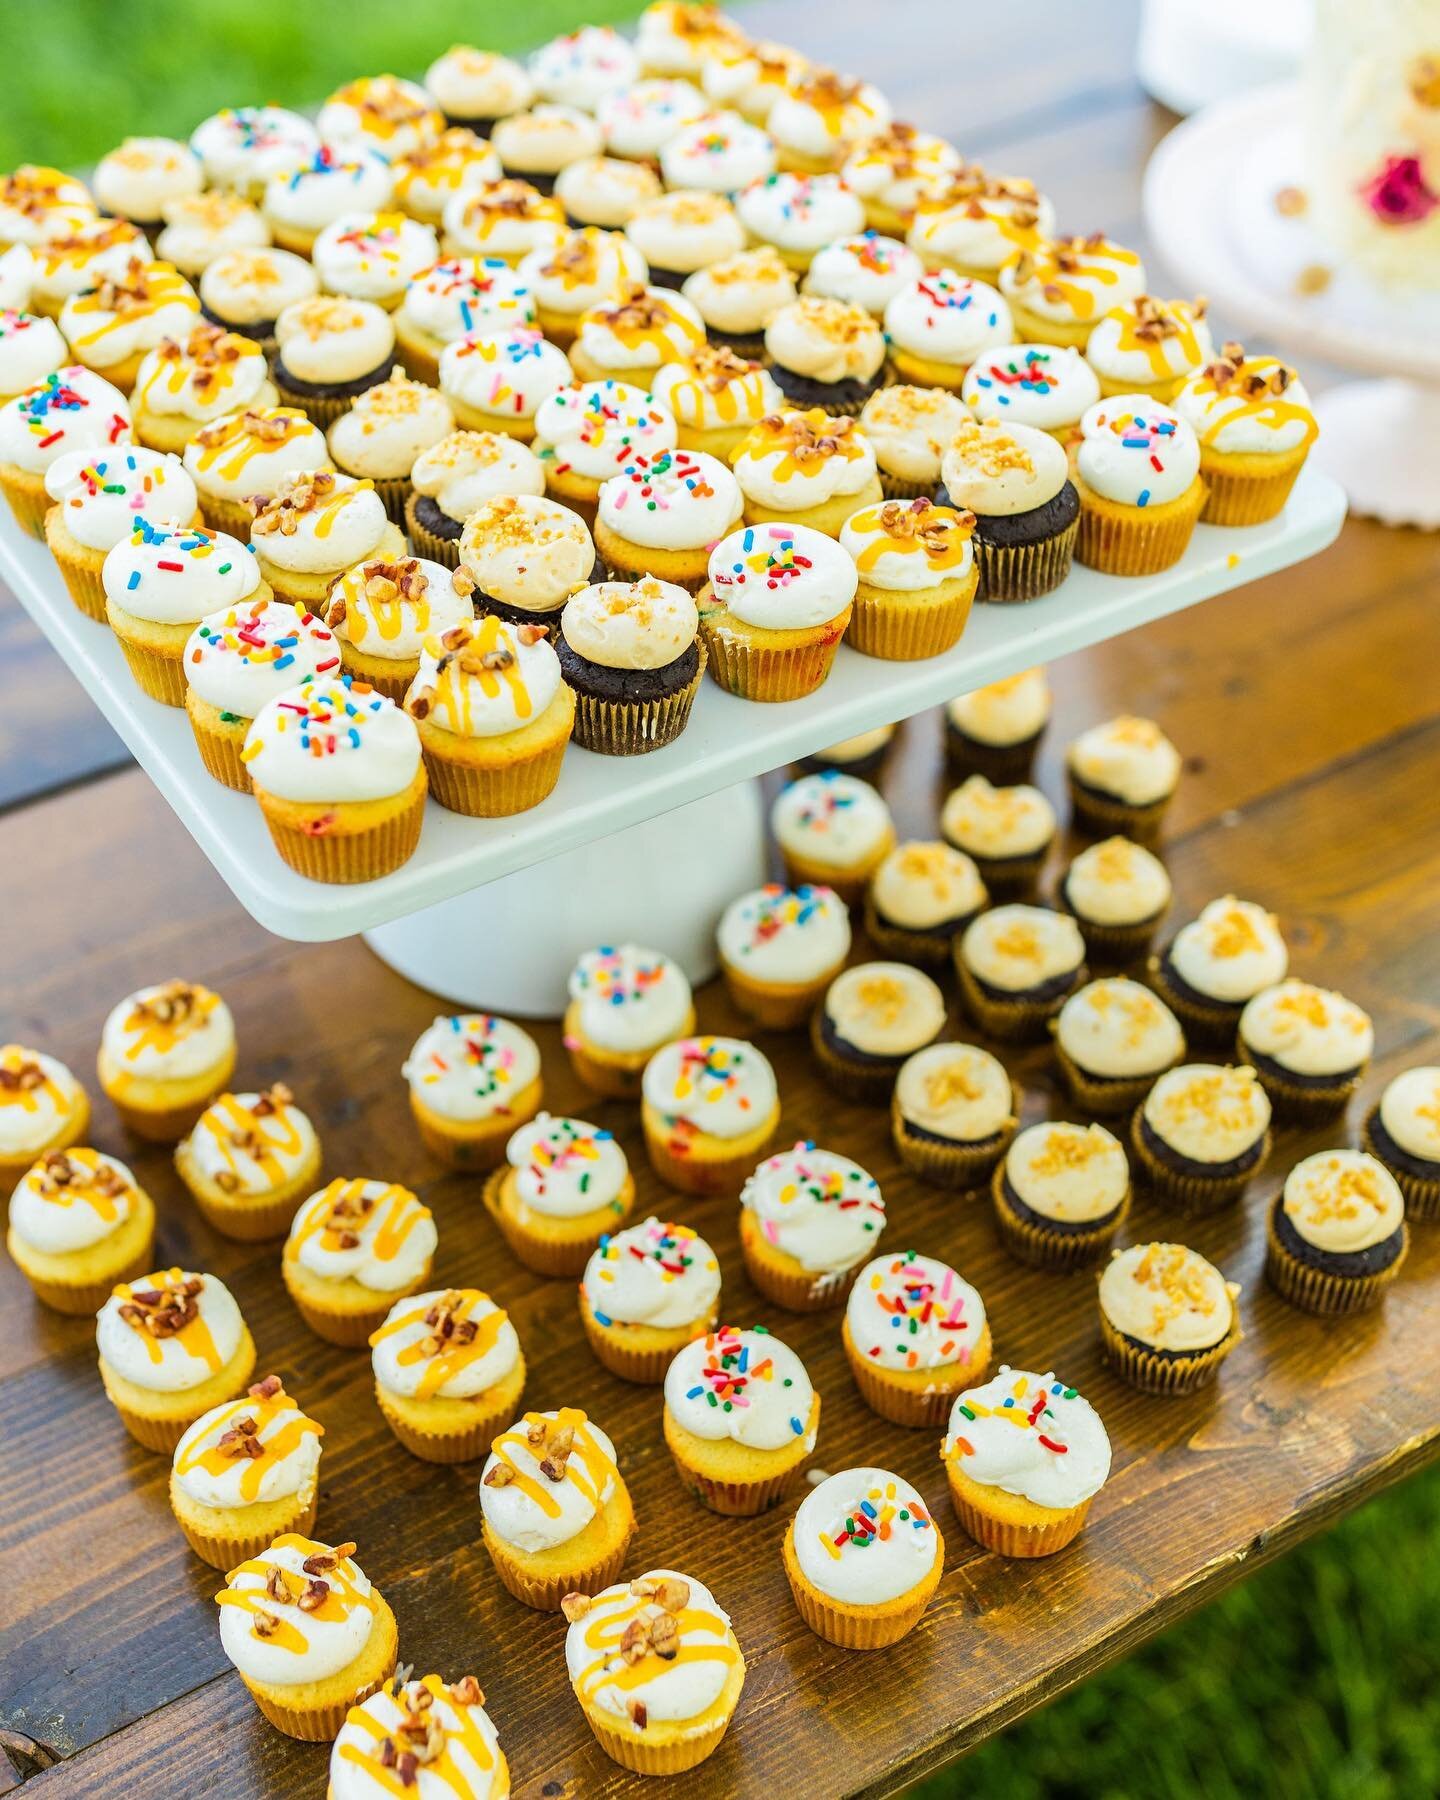 🎉 Happy 6th Birthday to Bowl and Arrow! 🎉

Some cute little cupcakes from a wedding this summer. 

Photo: @merissalambertphotography 
Venue: @starmbarn 
Planner / Design: @bijouweddingsbydesign 
Florist: @thewildblume 
Catering: @saucecateringmonta